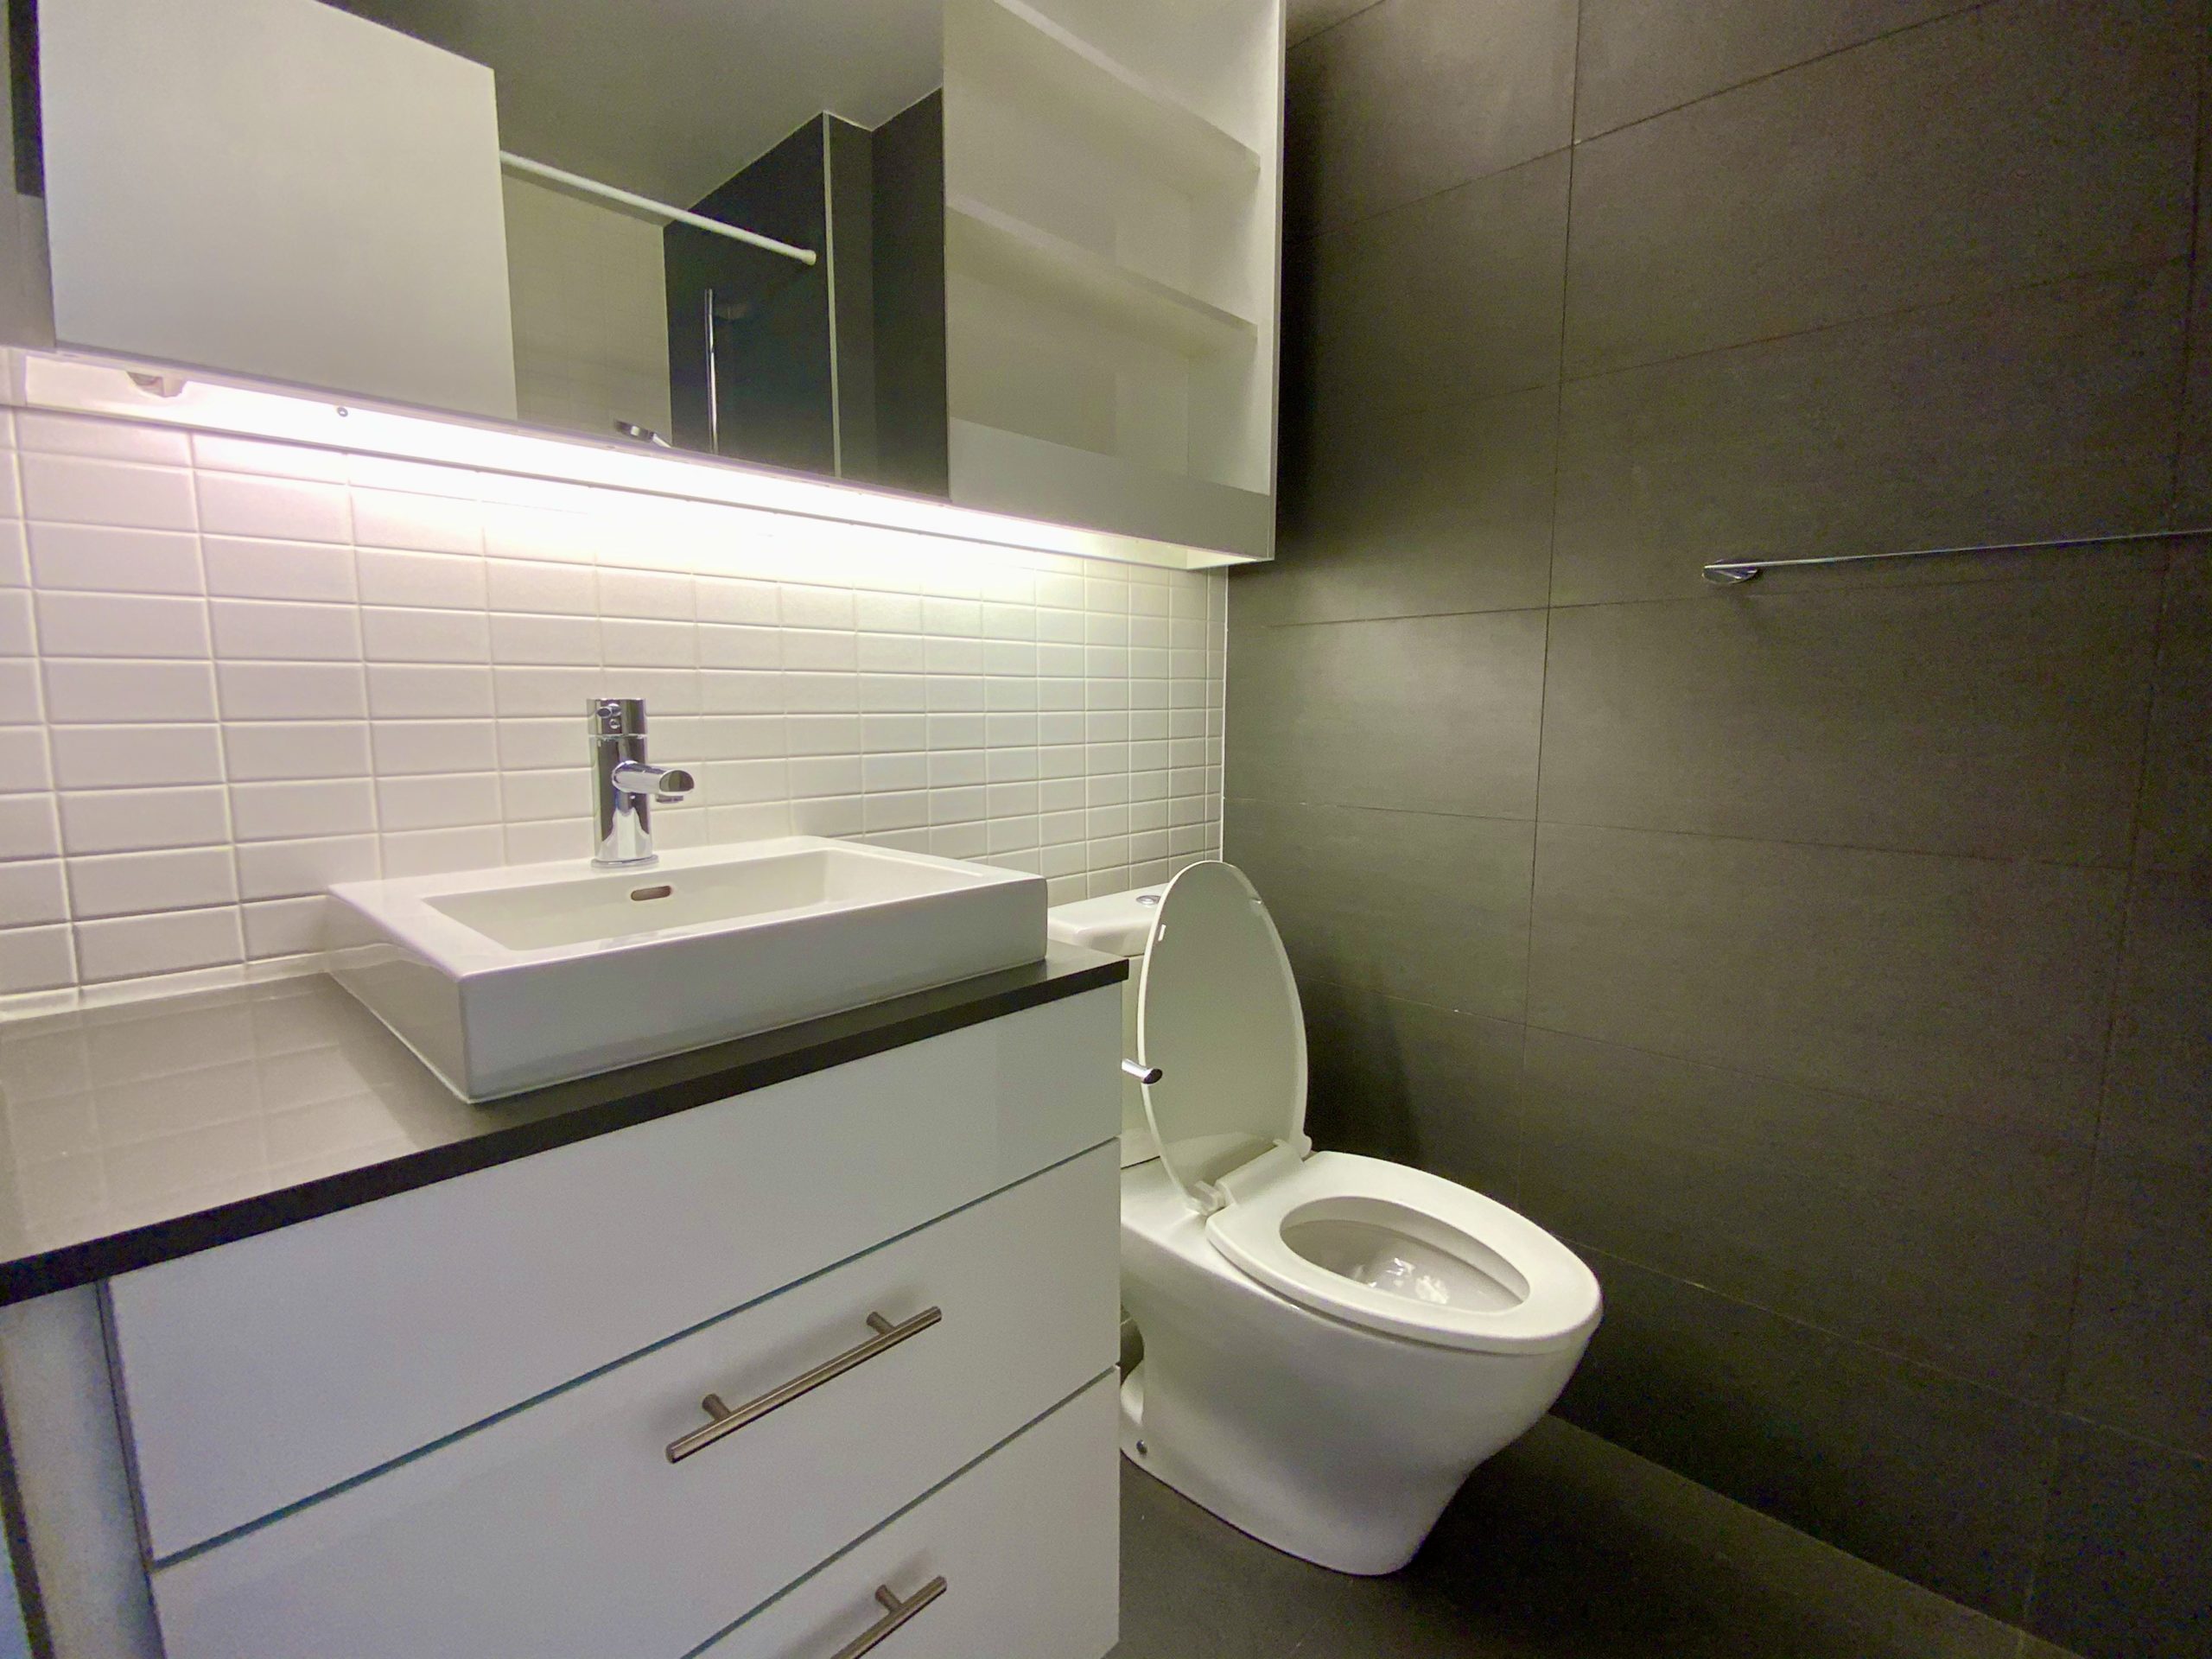 Modern bathroom with black and white tiles, raised sink bowl and wall-mounted shelves.